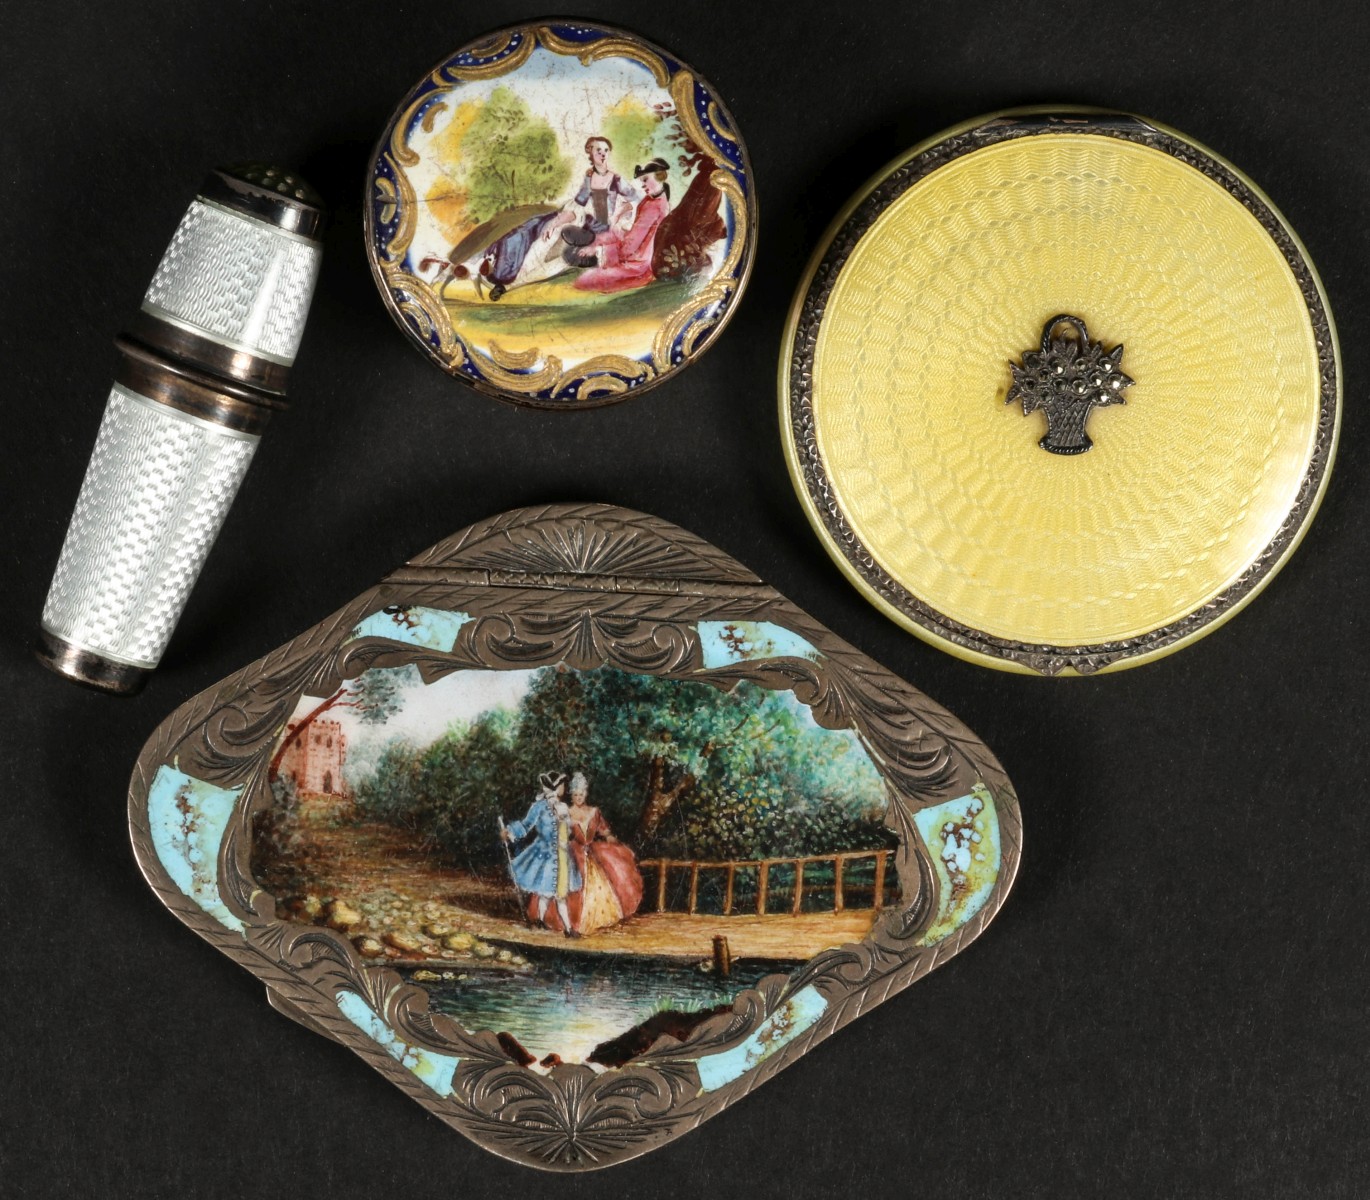 GUILLOCHE, VIENNESE AND OTHER ENAMELED OBJECTS